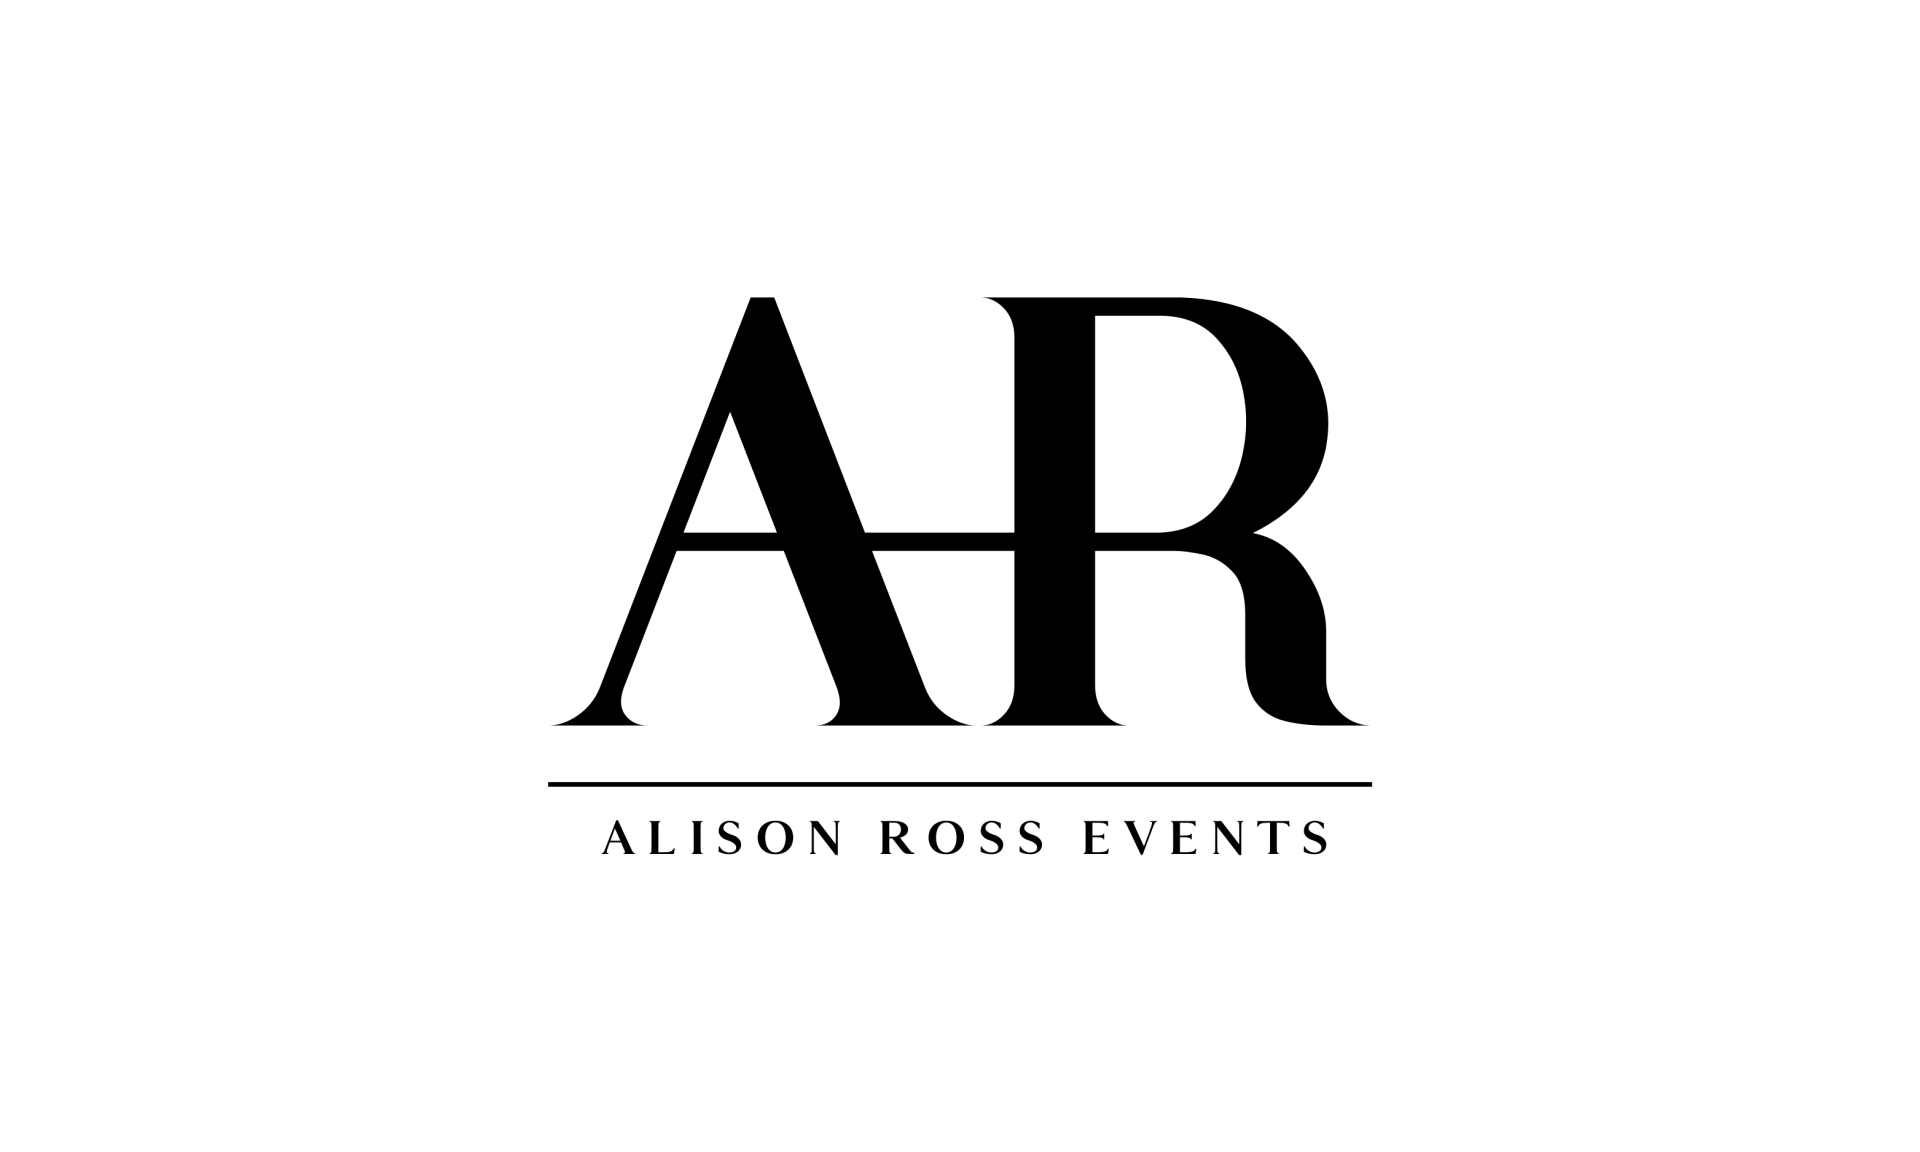 Alison Ross Events